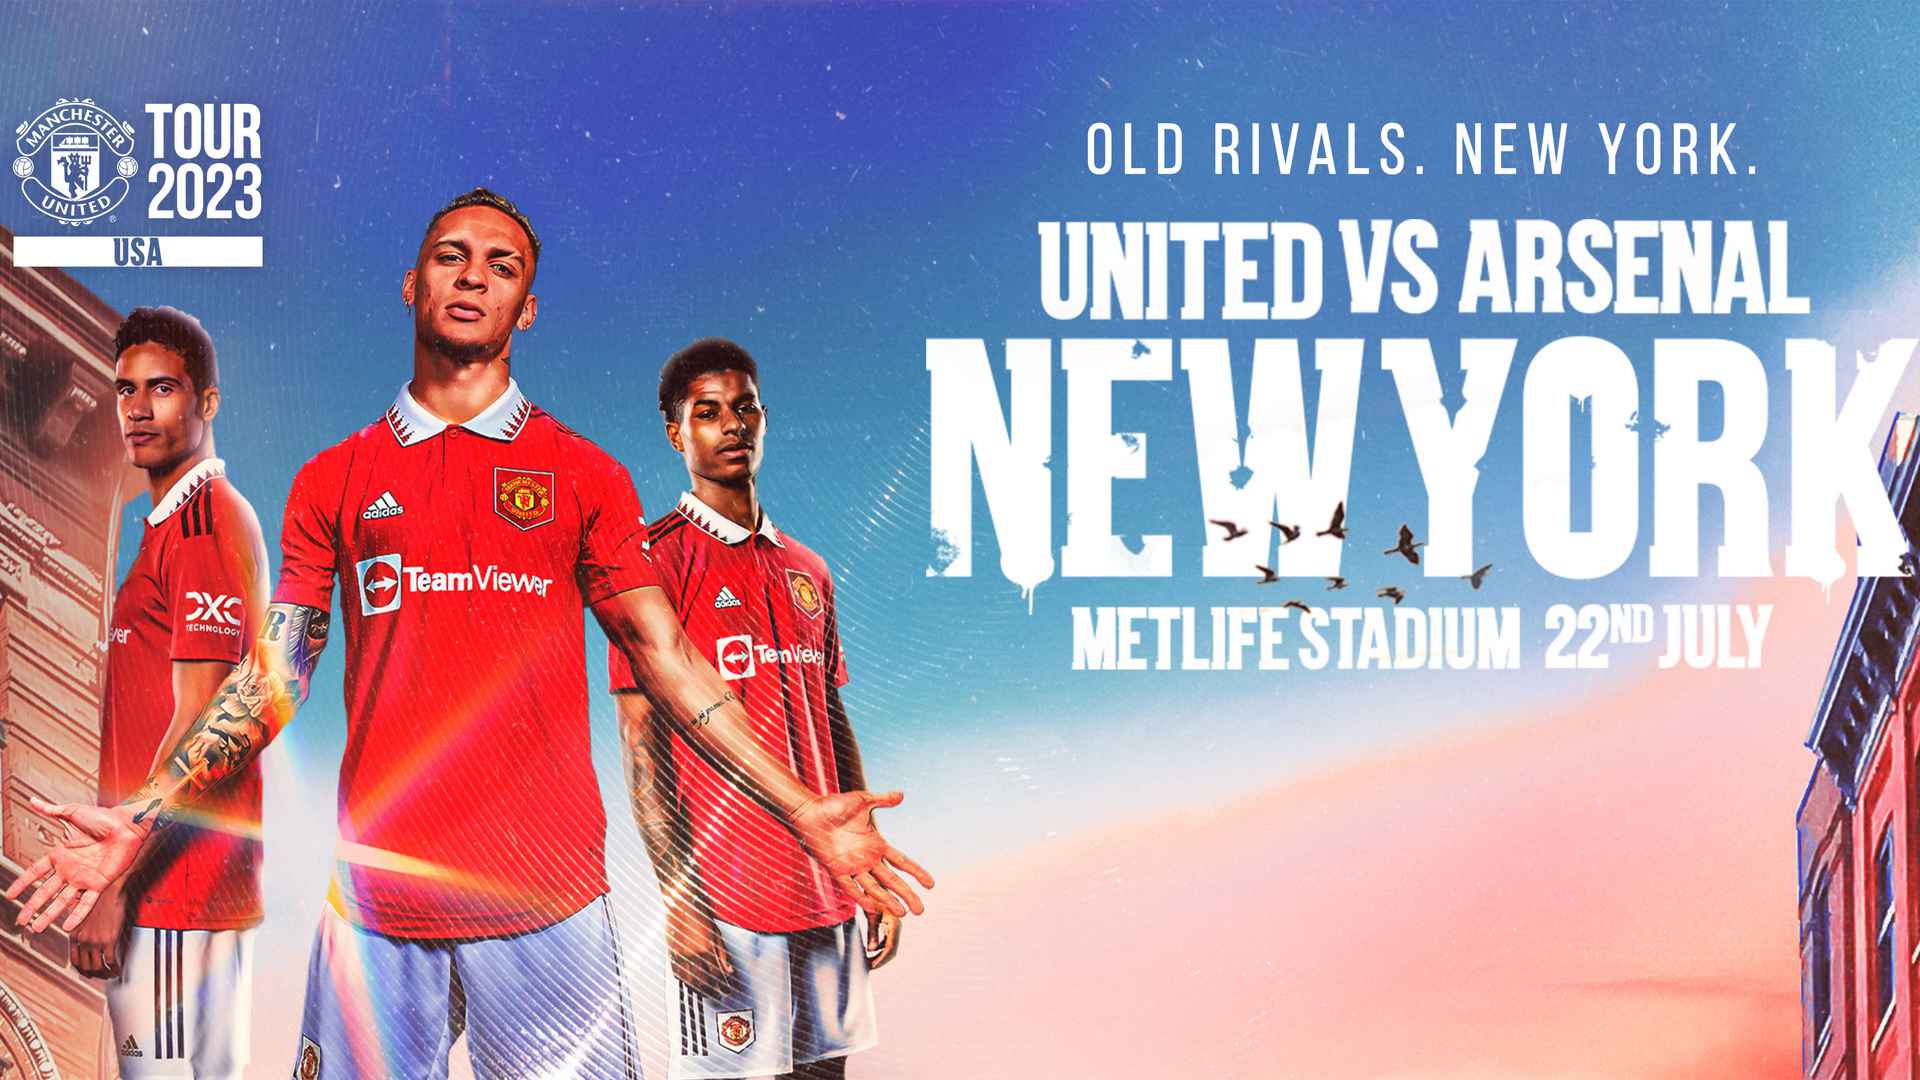 Man Utd to play Arsenal in New York during Tour 2023 Manchester United